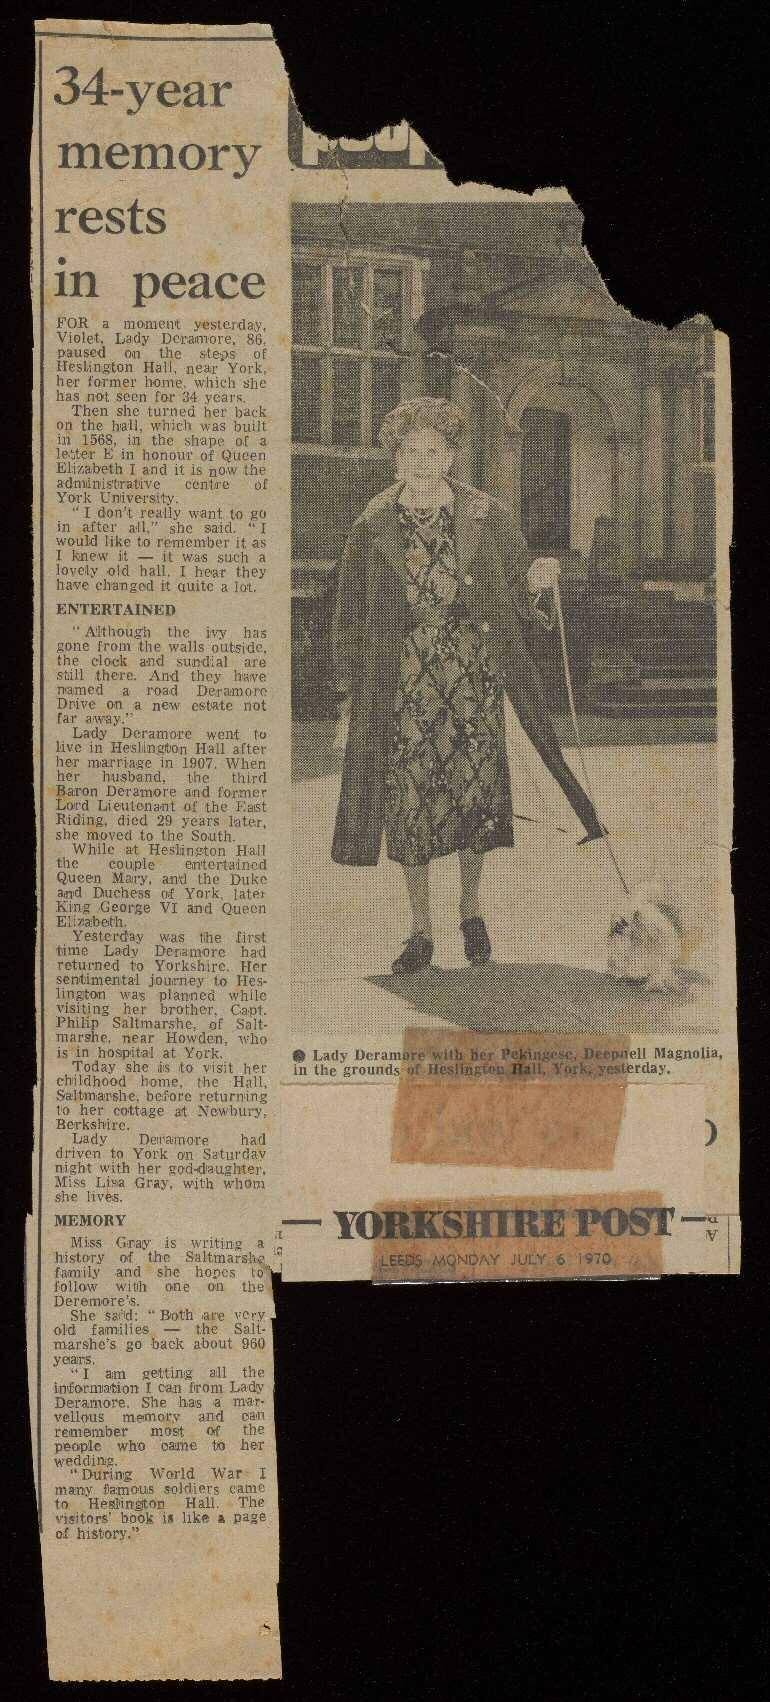 Source 5 VDER 3/1/2 Yorkshire Post article dated July 6 th 1970.